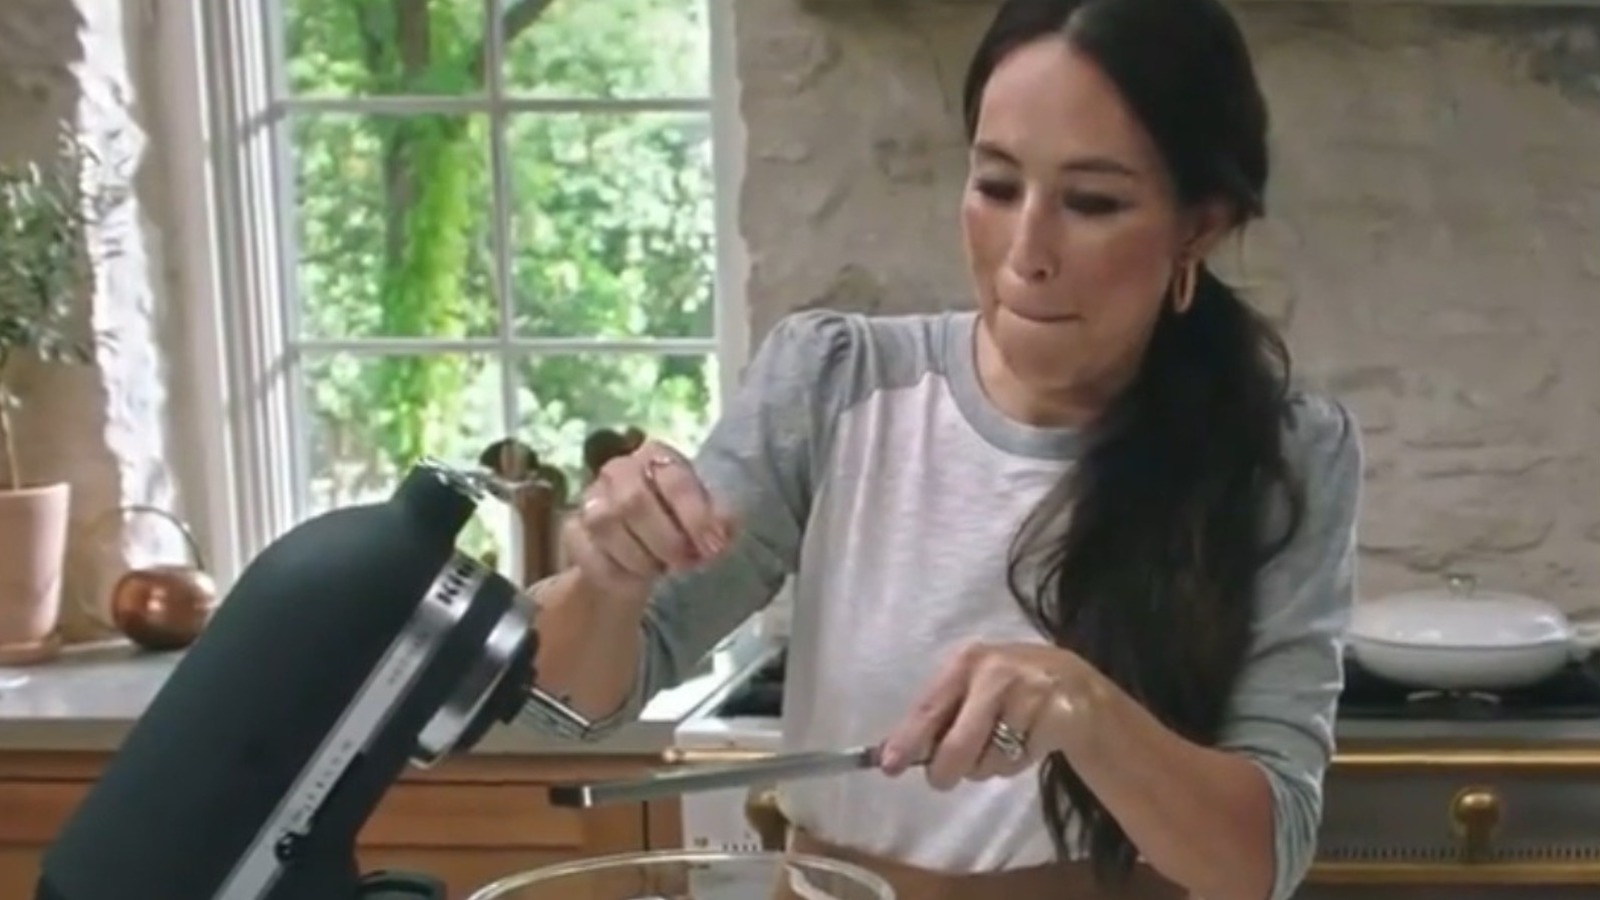 The Reason People Are Criticizing Joanna Gaines' New Cooking Show - Ma...